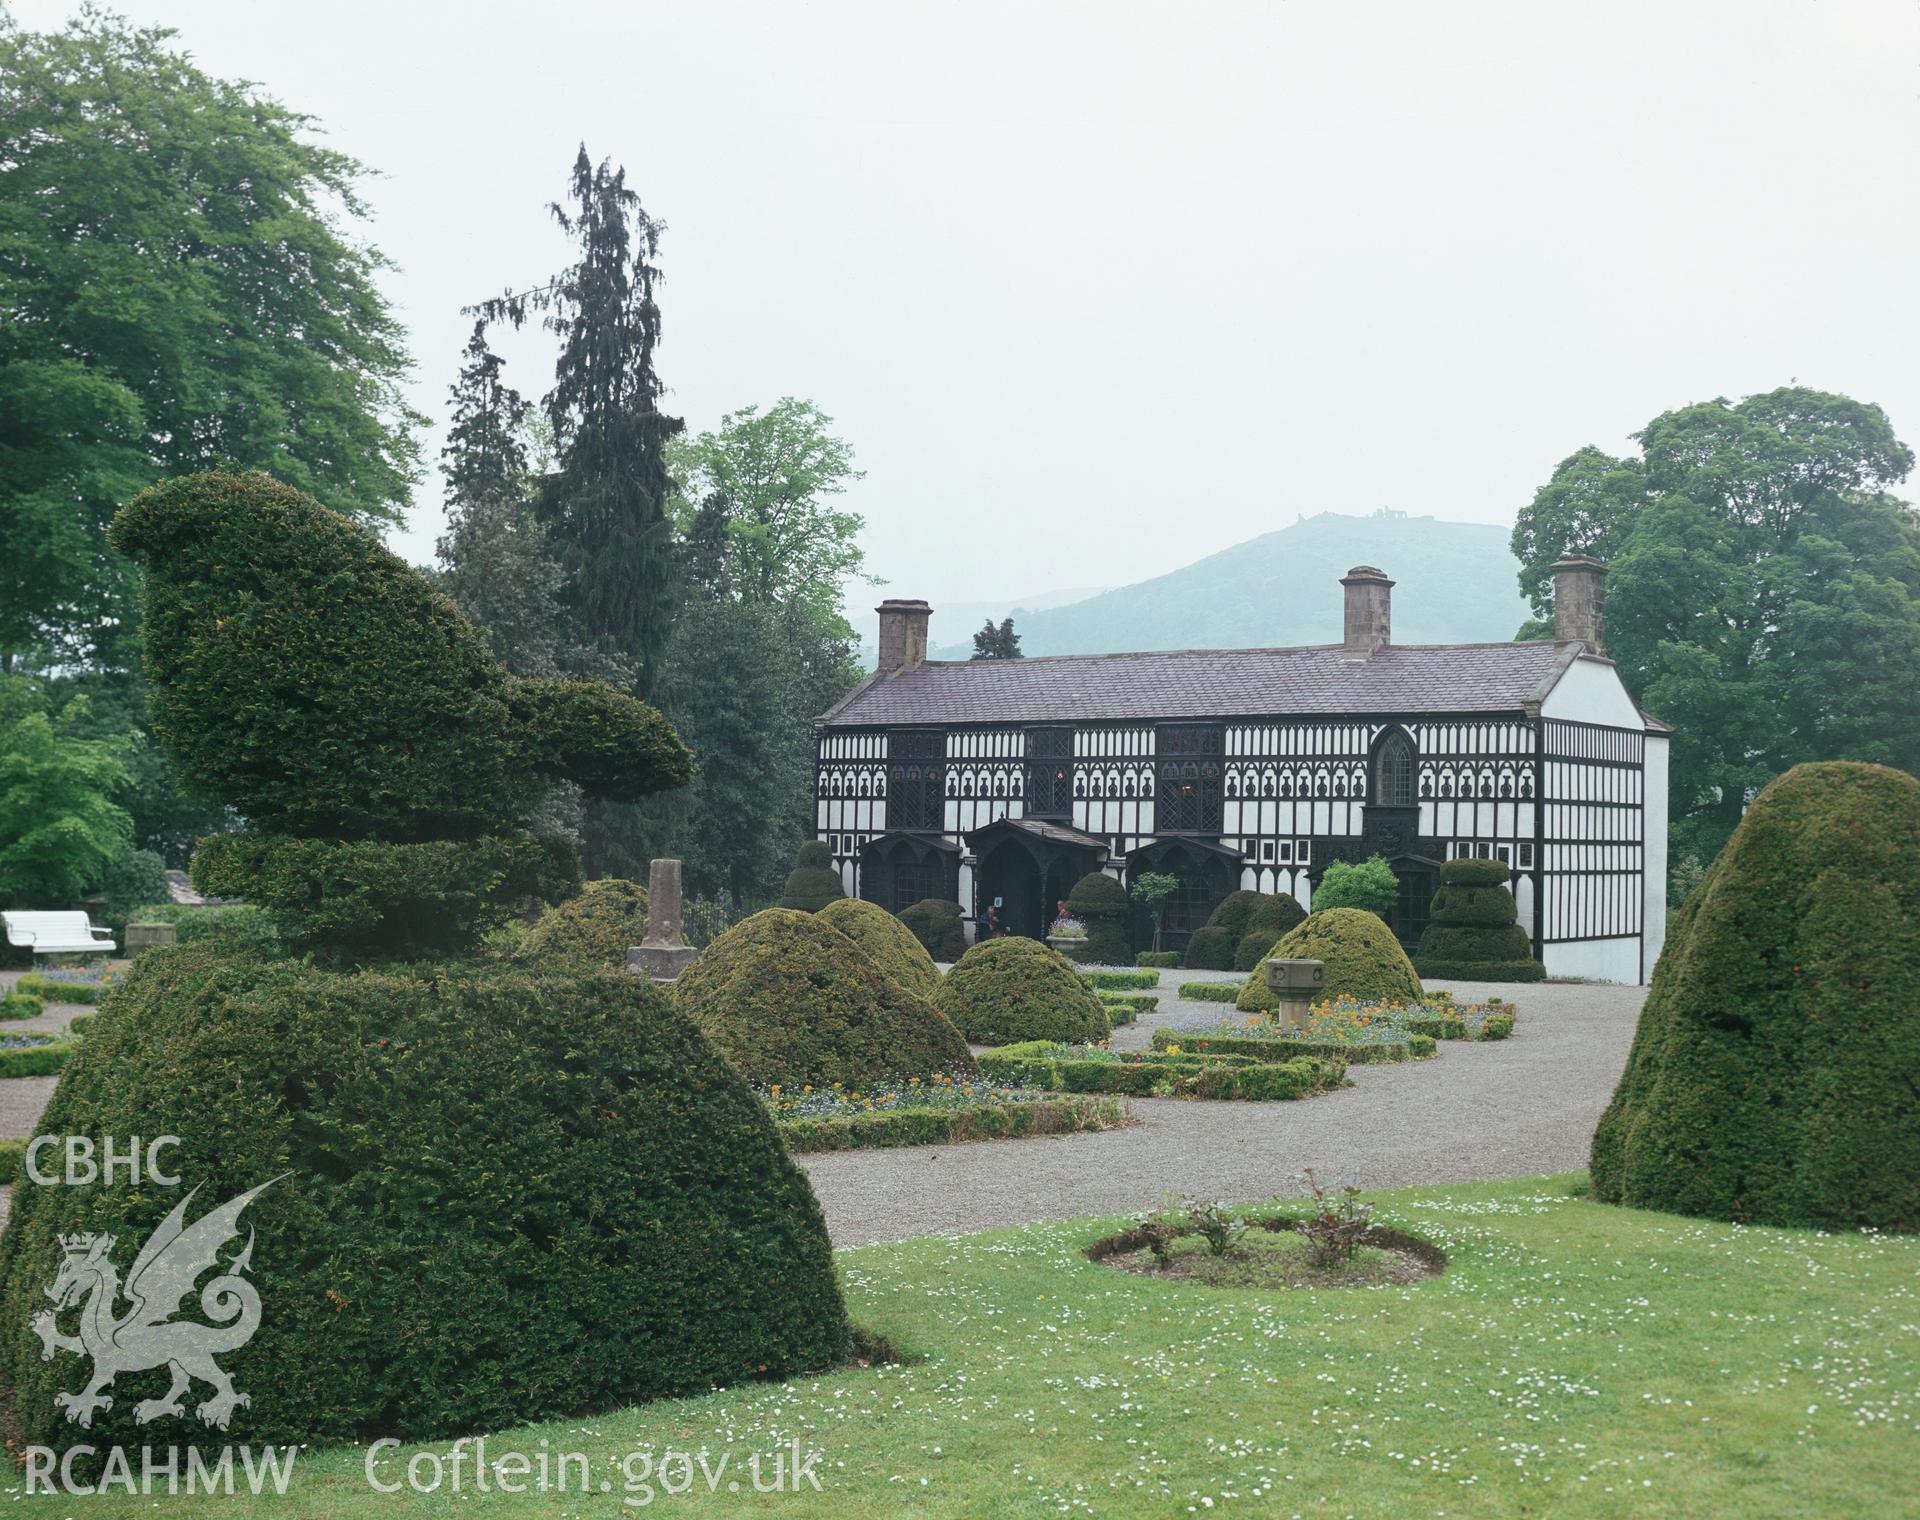 Colour transparency showing exterior view of Plas Newydd, Llangollen, produced by R.G. Nicol, c.1979